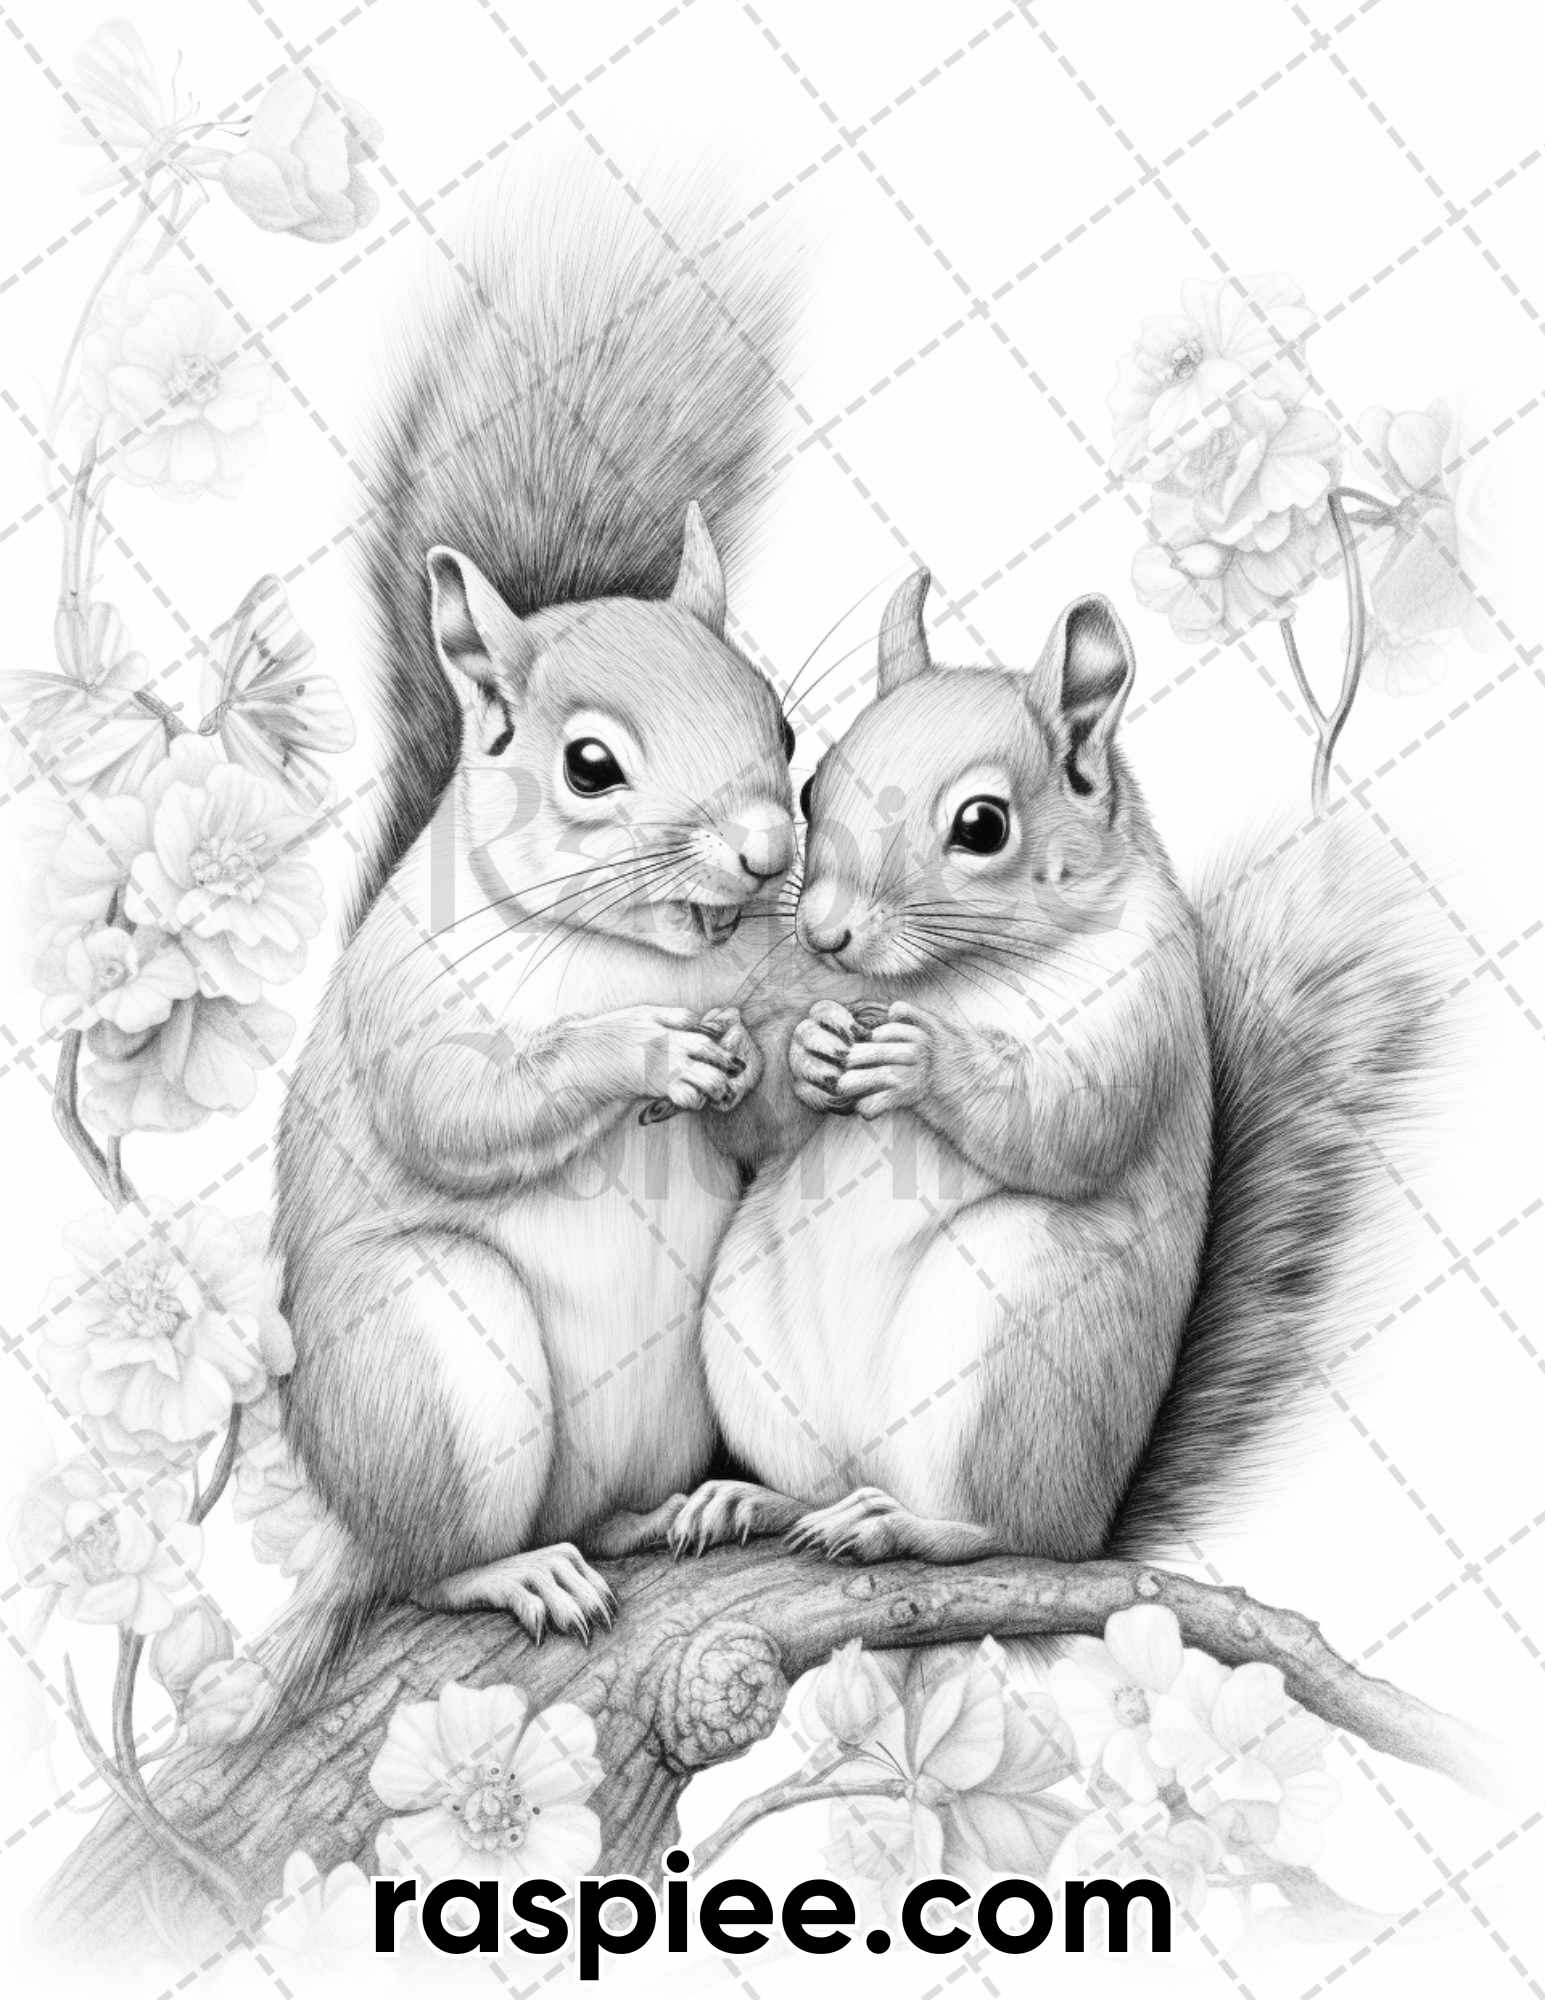 Animal Couple Coloring Page, Stress Relief Coloring Sheet, Romantic Animal Coloring Pages, High-Quality Coloring Printable, Animal Coloring Book Printable, Animal Coloring Pages for Adults